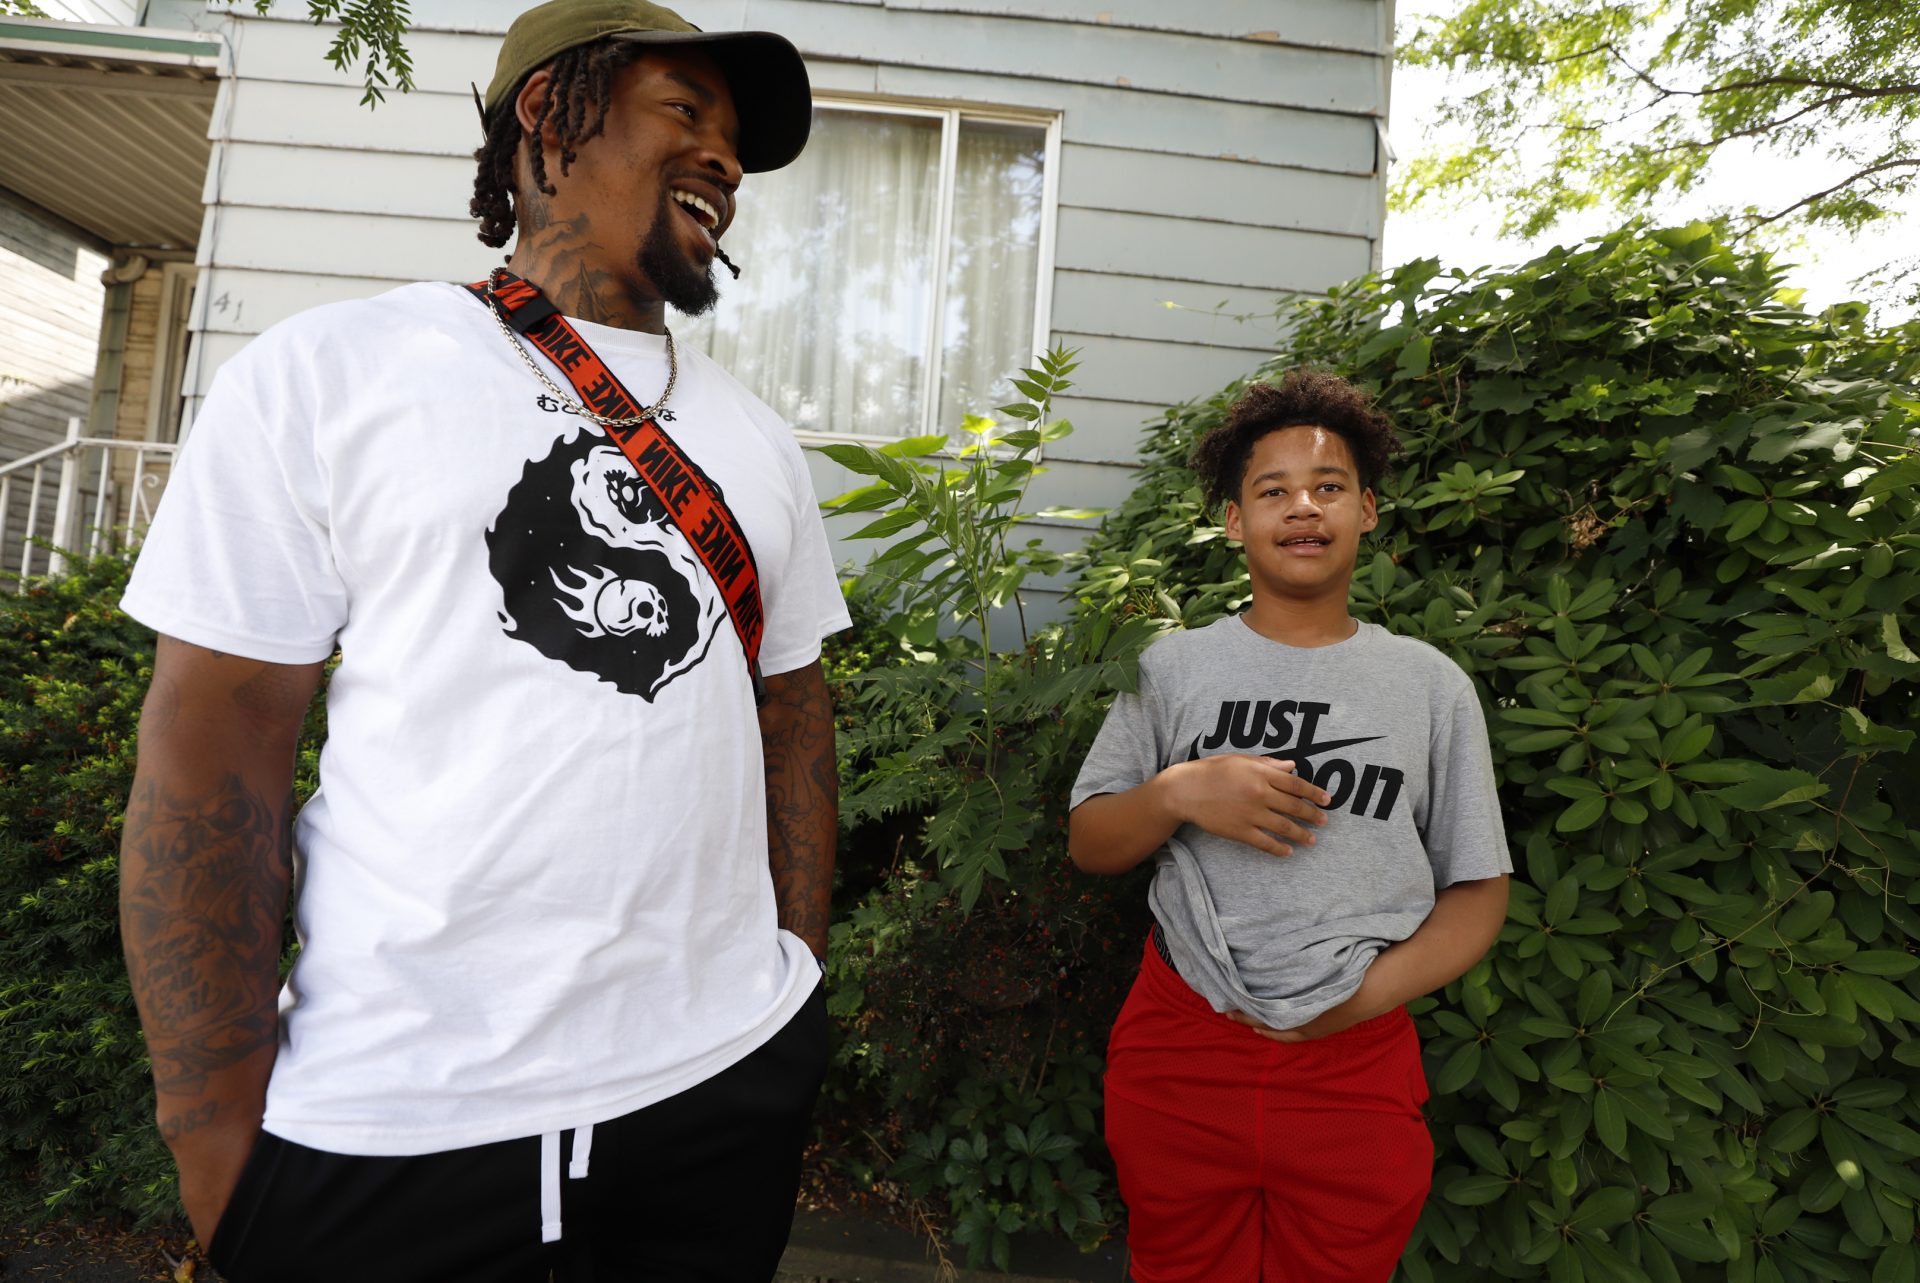 Daylan McLee, left and son Avian, 13, stand on the sidewalk in front of their home in Uniontown, Pa., Monday, June 22, 2020. On Sunday McLee helped pull Uniontown Police Officer Jay Hanley from his burning patrol car following a collision.